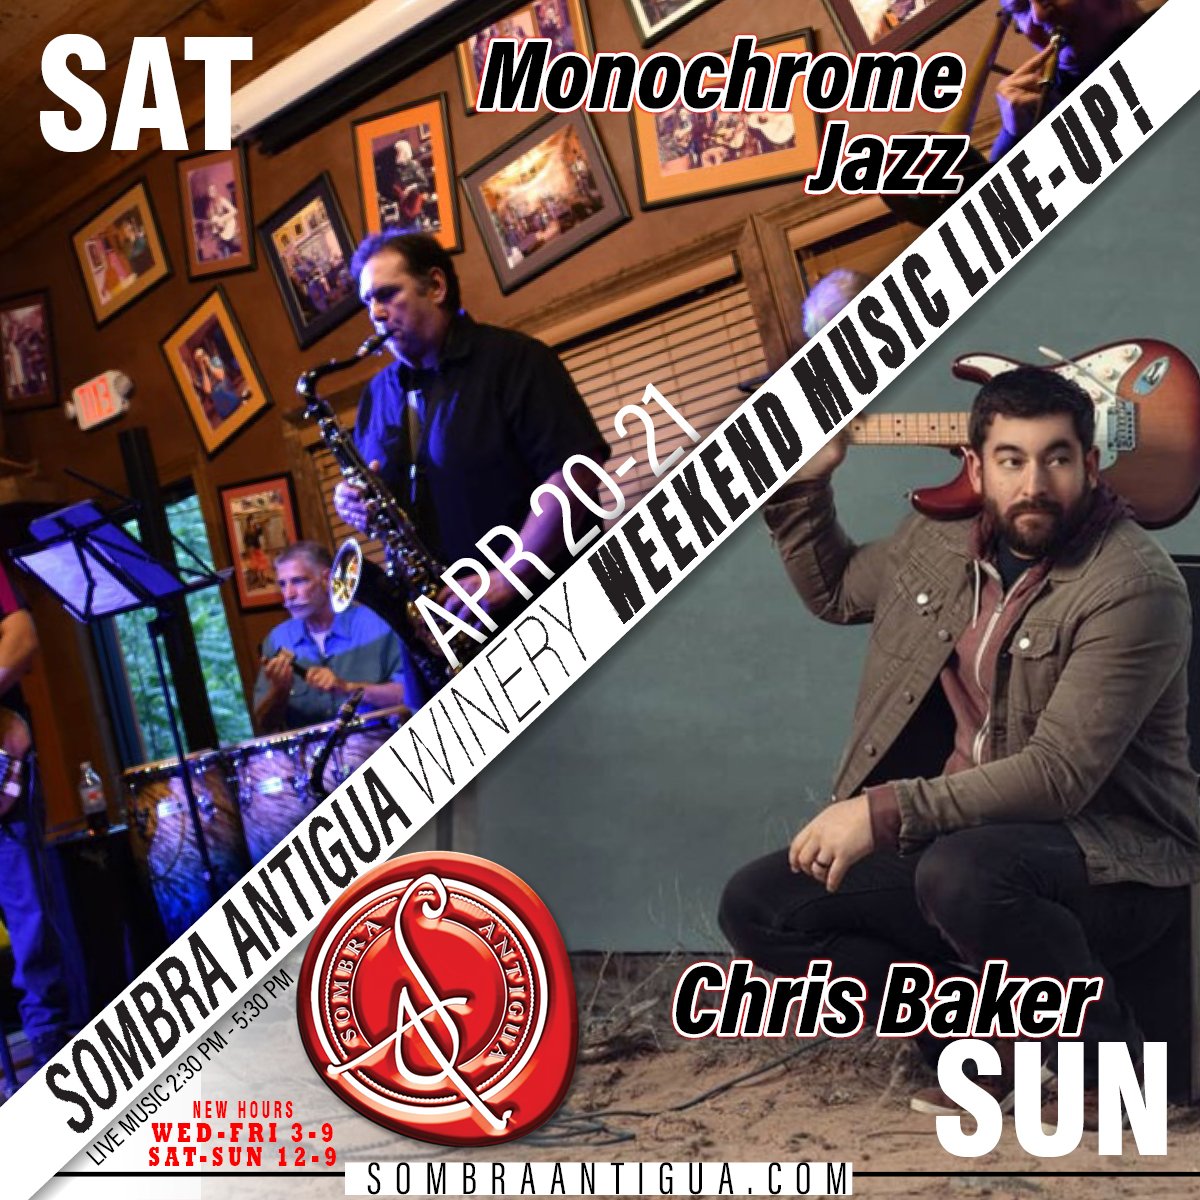 Exciting news! This weekend is filled with amazing music. On Saturday, we're showcasing the mesmerizing sounds of Monochrome Jazz, followed by the talented Chris Baker on Sunday. It's going to be a sensational weekend full of rhythm and harmony!